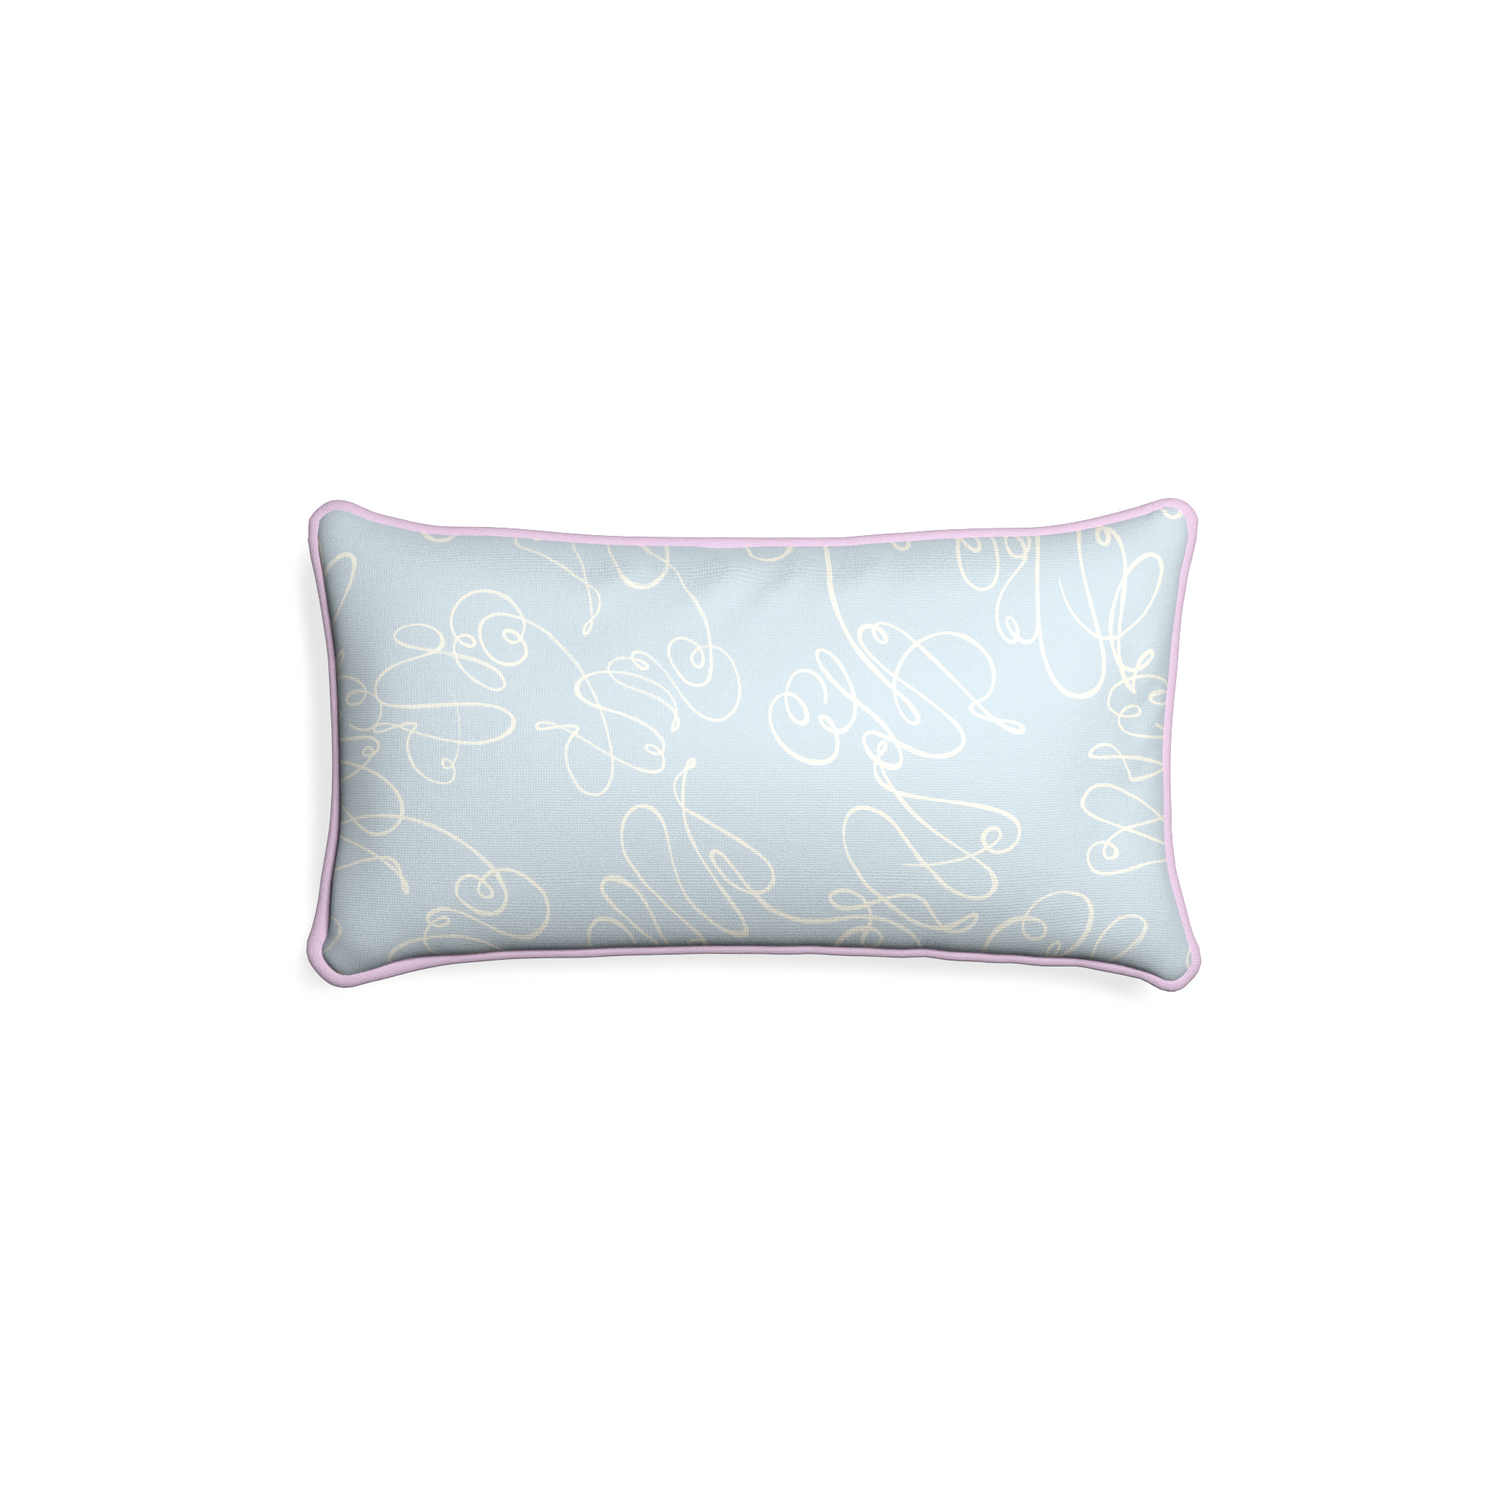 Petite-lumbar mirabella custom powder blue abstractpillow with l piping on white background